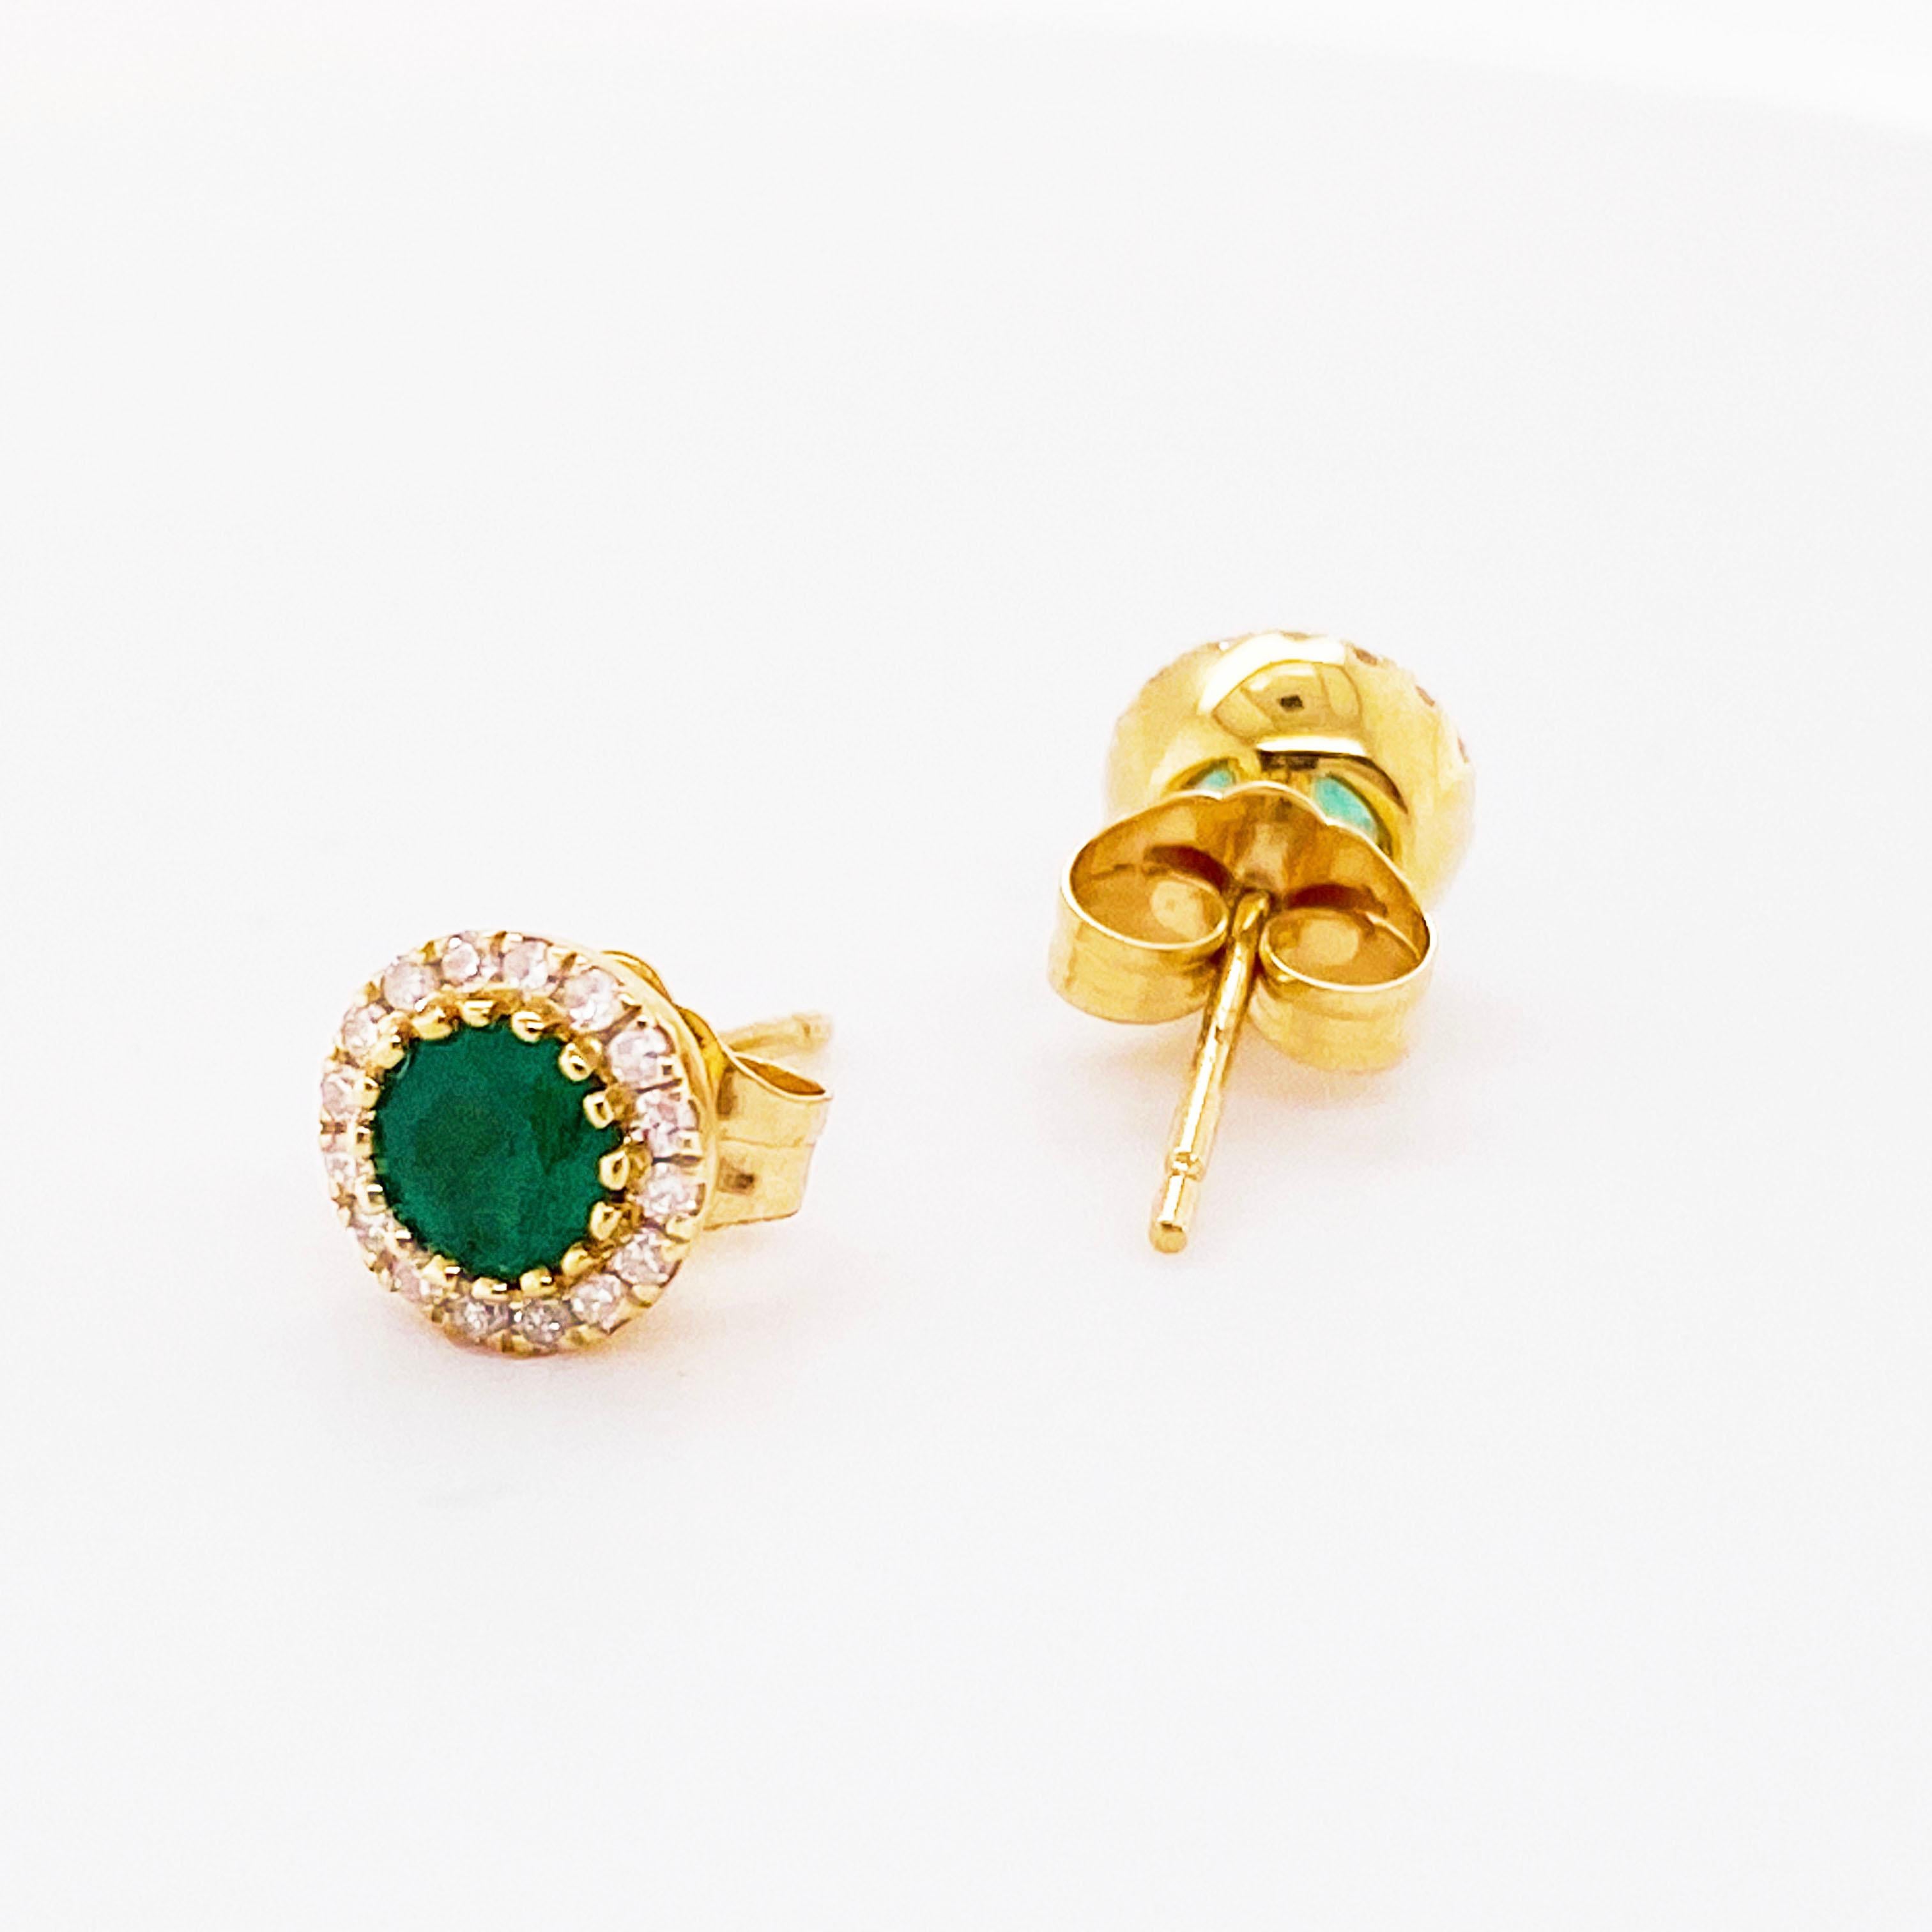 The 14 karat yellow gold earrings have a beautiful 1/4 carat  green emerald in each and surrounded by 16 diamonds in each earring. The total is 32 diamonds with a clarity of VS2-SI1 an a color of G-H and a total of 2 round emeralds.  All gemstones